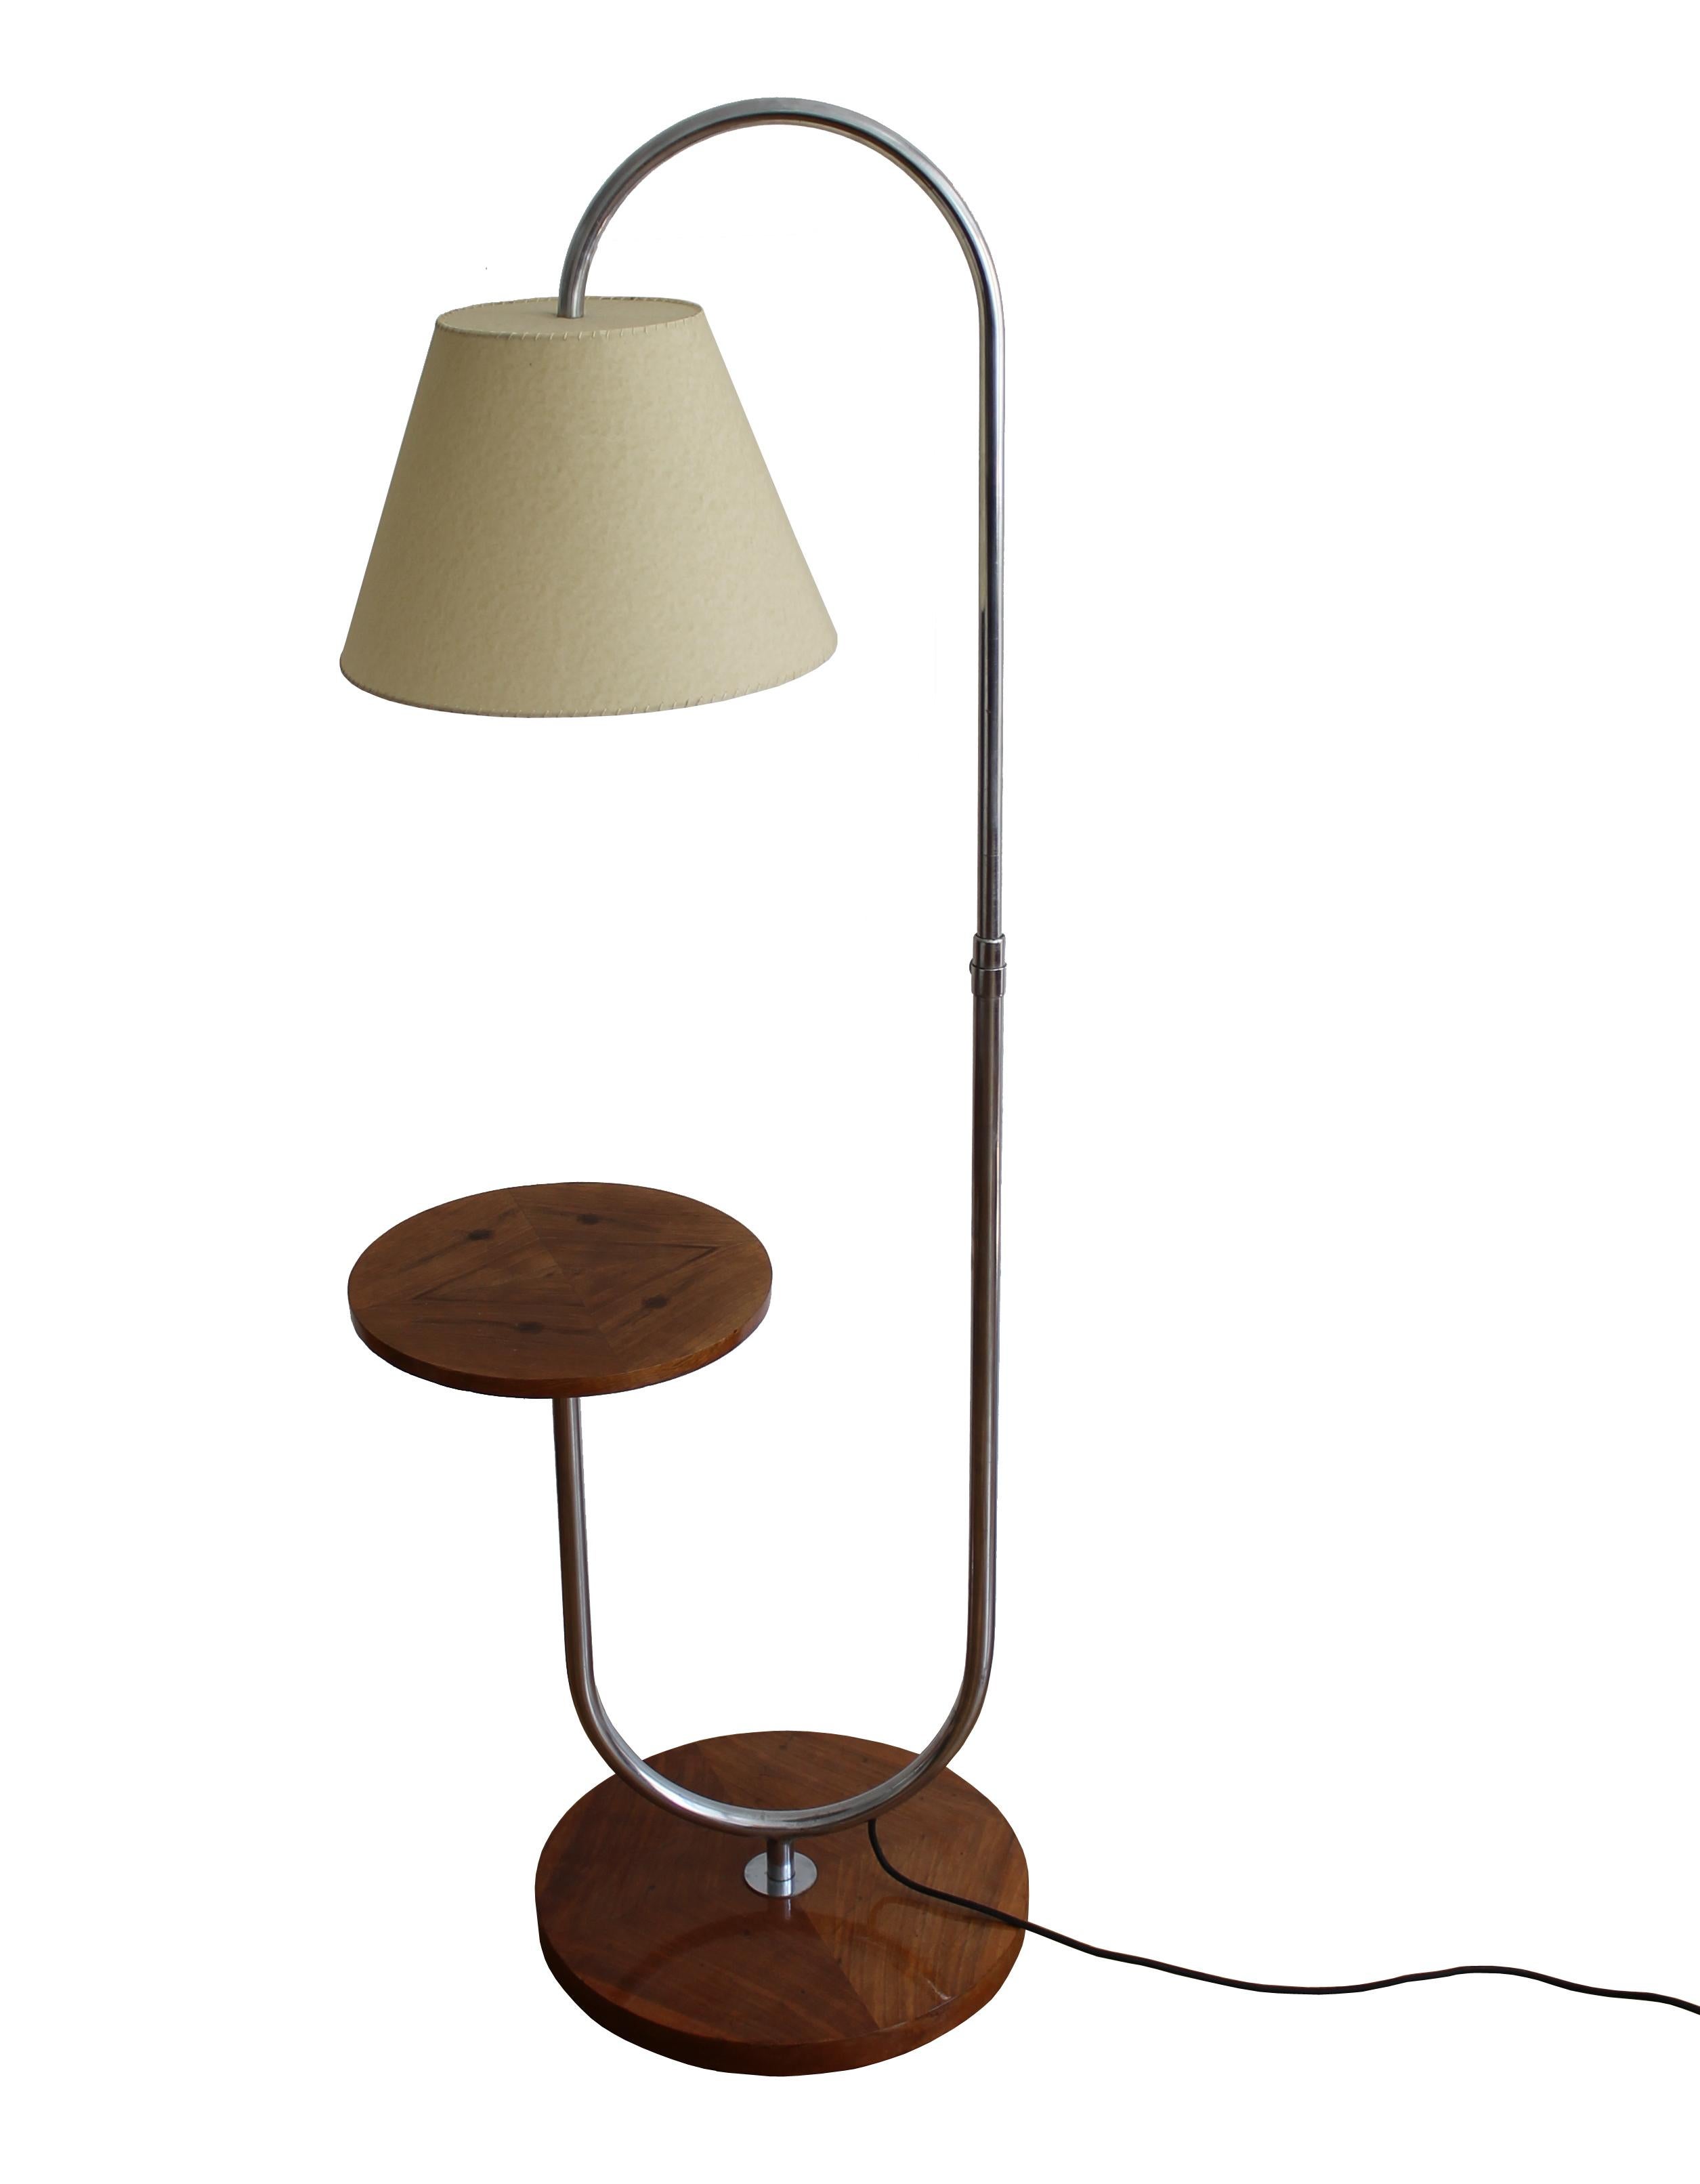 This Modernist floor lamp was designed by Robert Slezak and produced by The Slezak Company in the 1930s Czechoslovakia. This piece has got an elegant shape with a beautiful combination of walnut veneer and chromed steel. It is a perfect companion